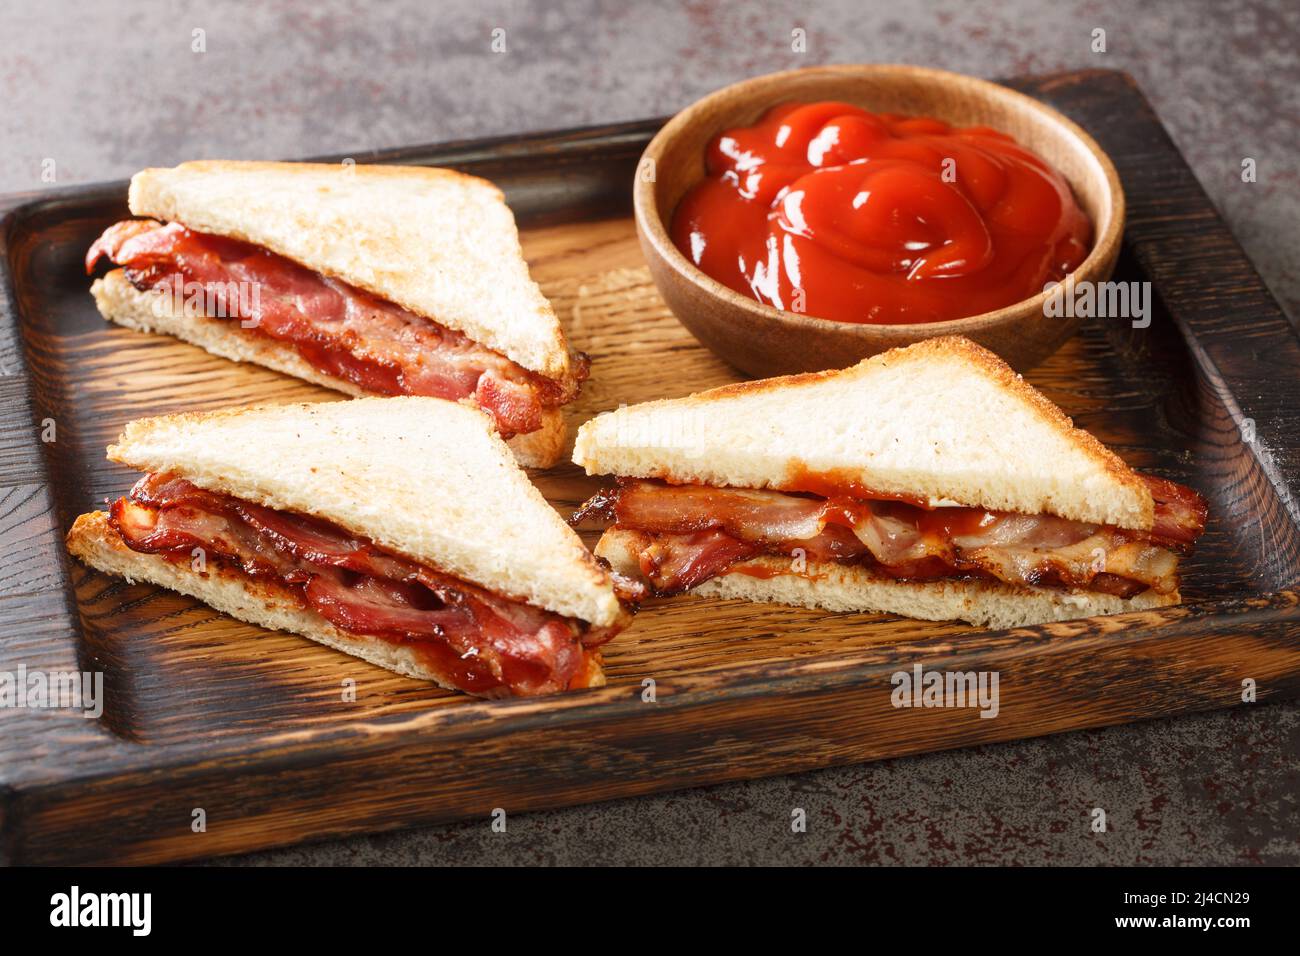 Sandwich with crispy bacon melted butter and ketchup close-up on a wooden tray on the table. horizontal Stock Photo